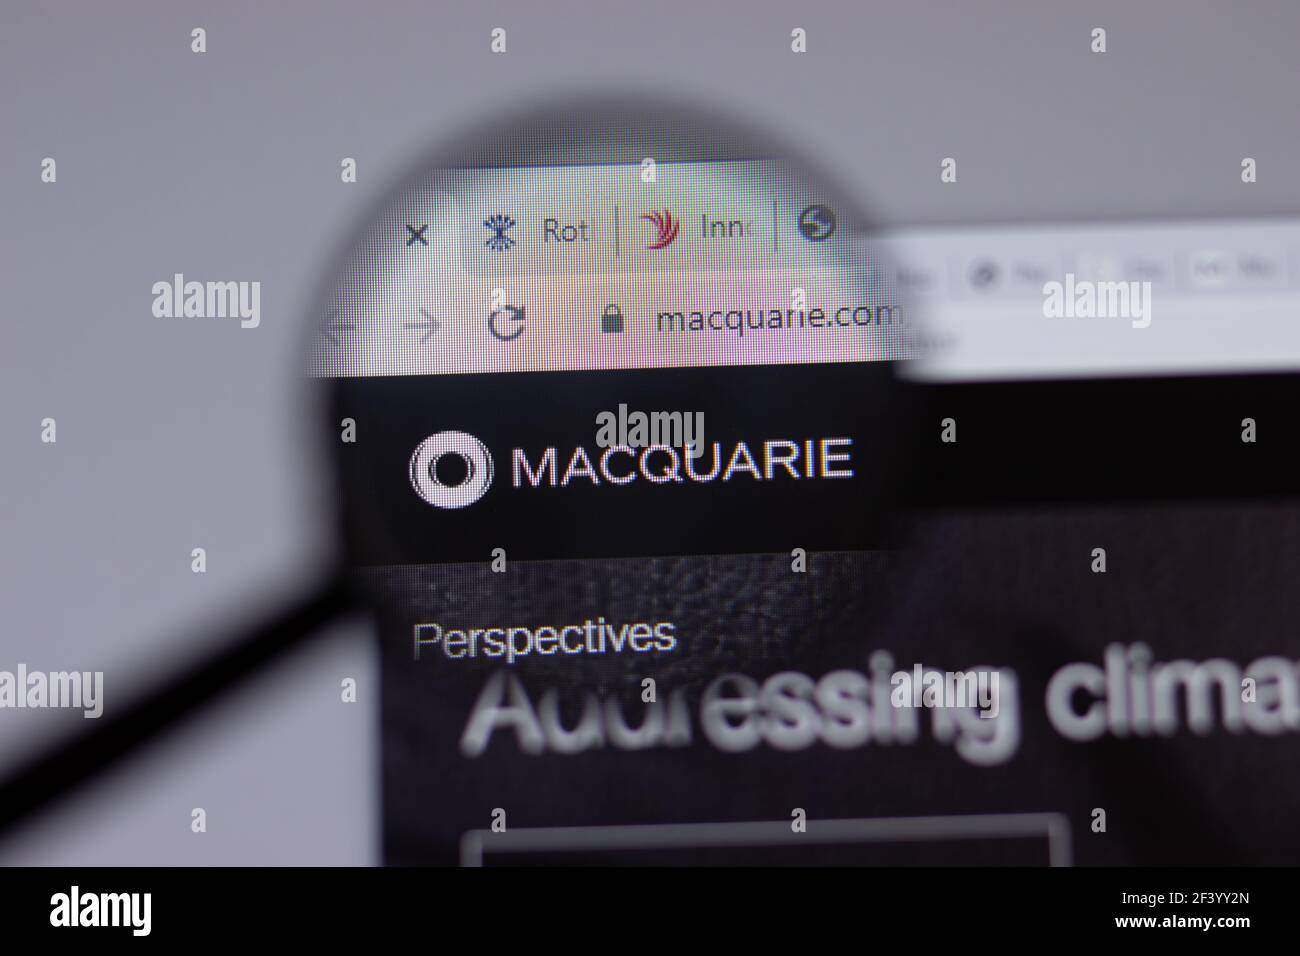 Macquarie Group logo displayed on smartphone hidden in jeans pocket Stock  Photo - Alamy